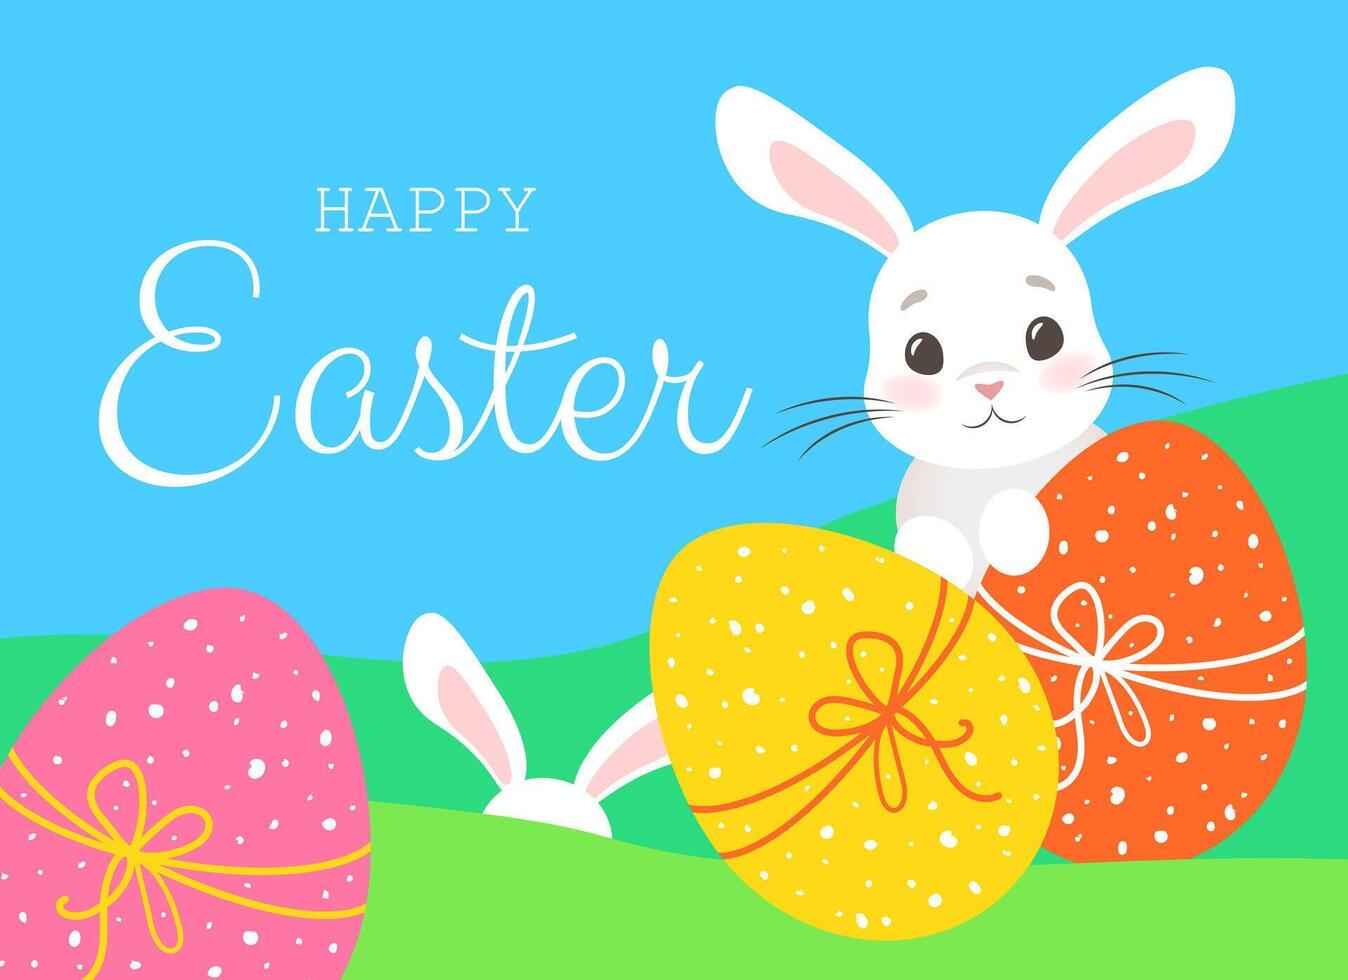 Happy Easter banner with Easter eggs and cute rabbit on blue background vector